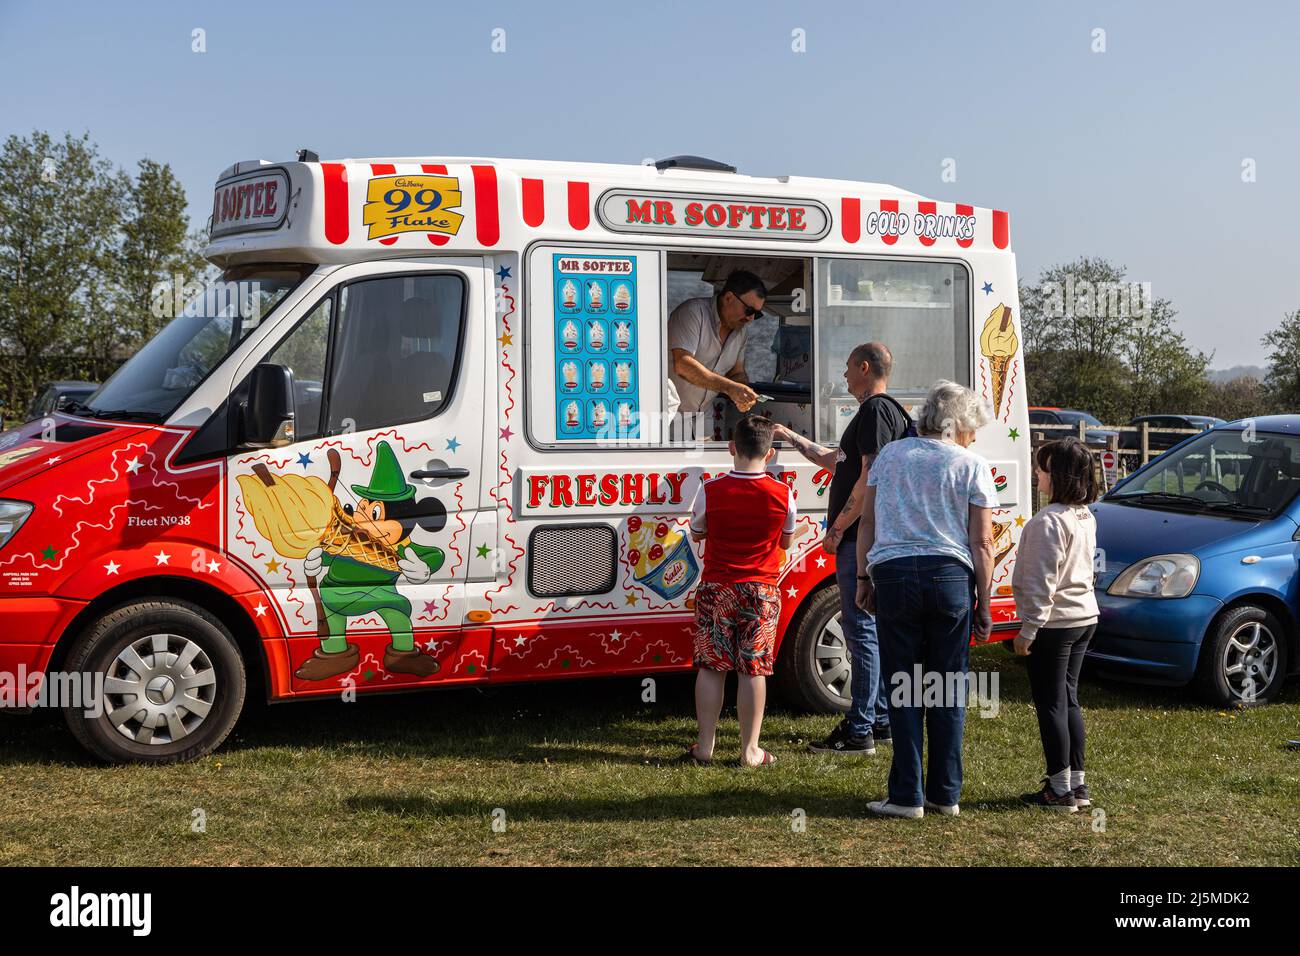 An ice cream vendor serves from his van with eager customers waiting in line Stock Photo